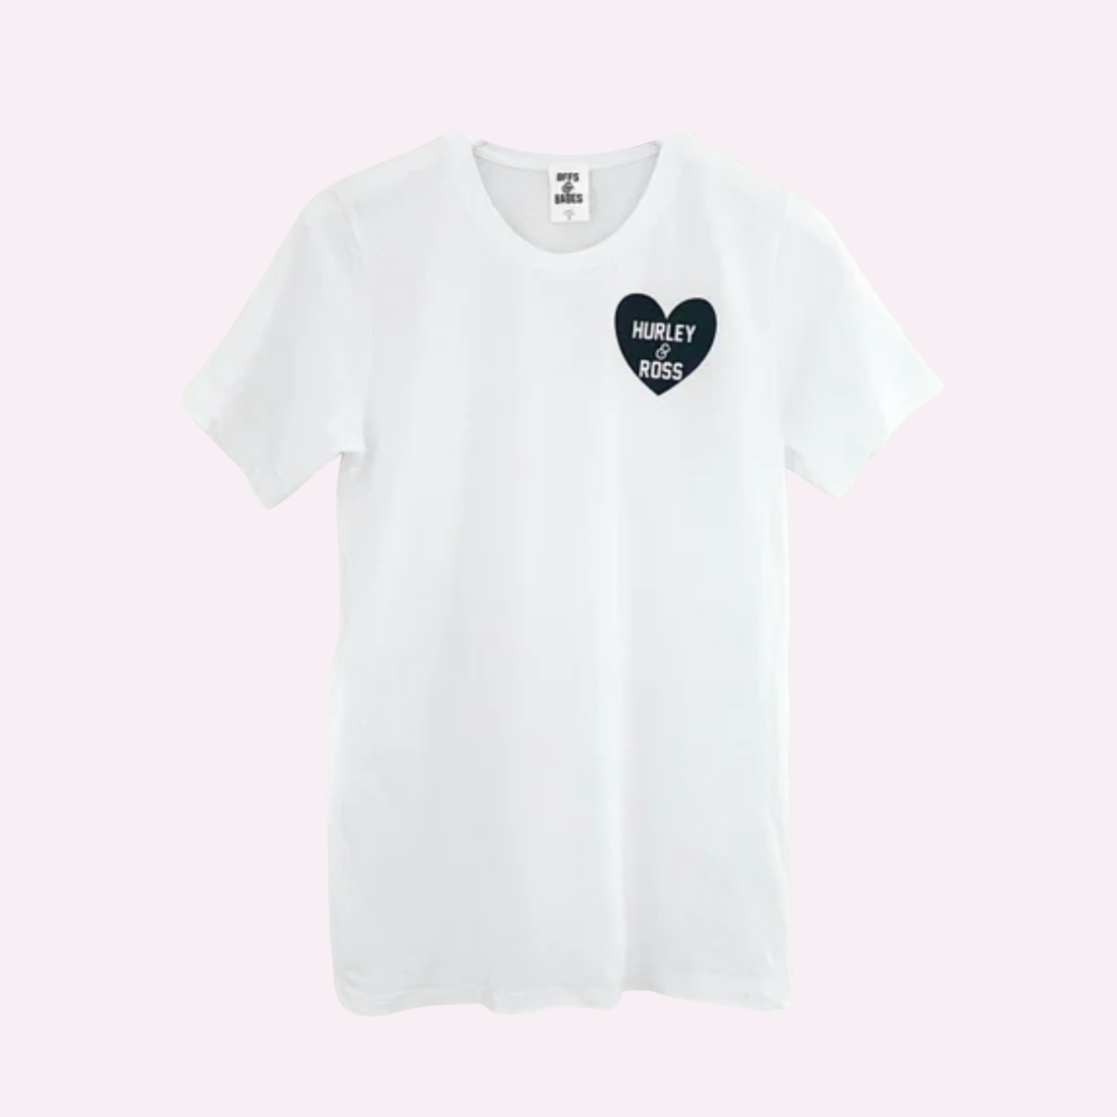 HEART U MOST ♡ white adult tee with black heart